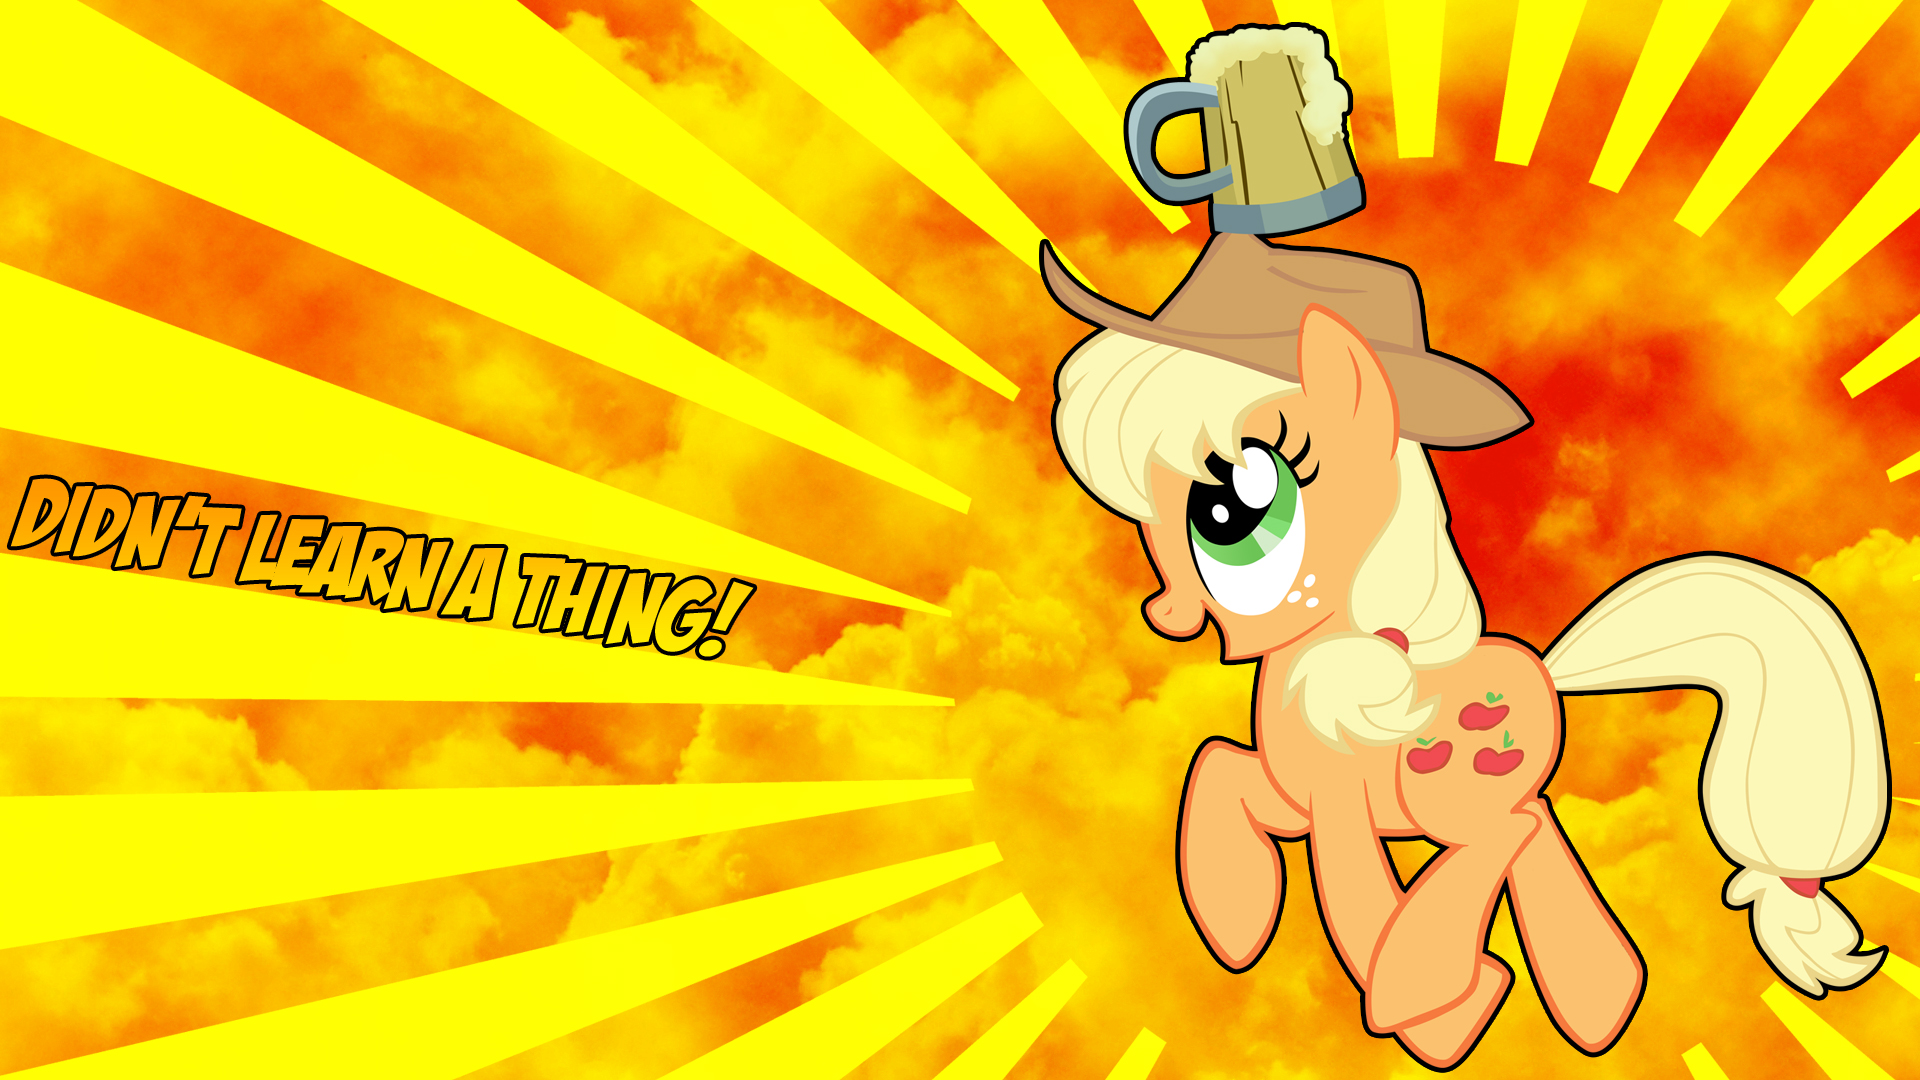 Applejack Didn't Learn A Thing Wallpaper by katiepox and Kigaroth